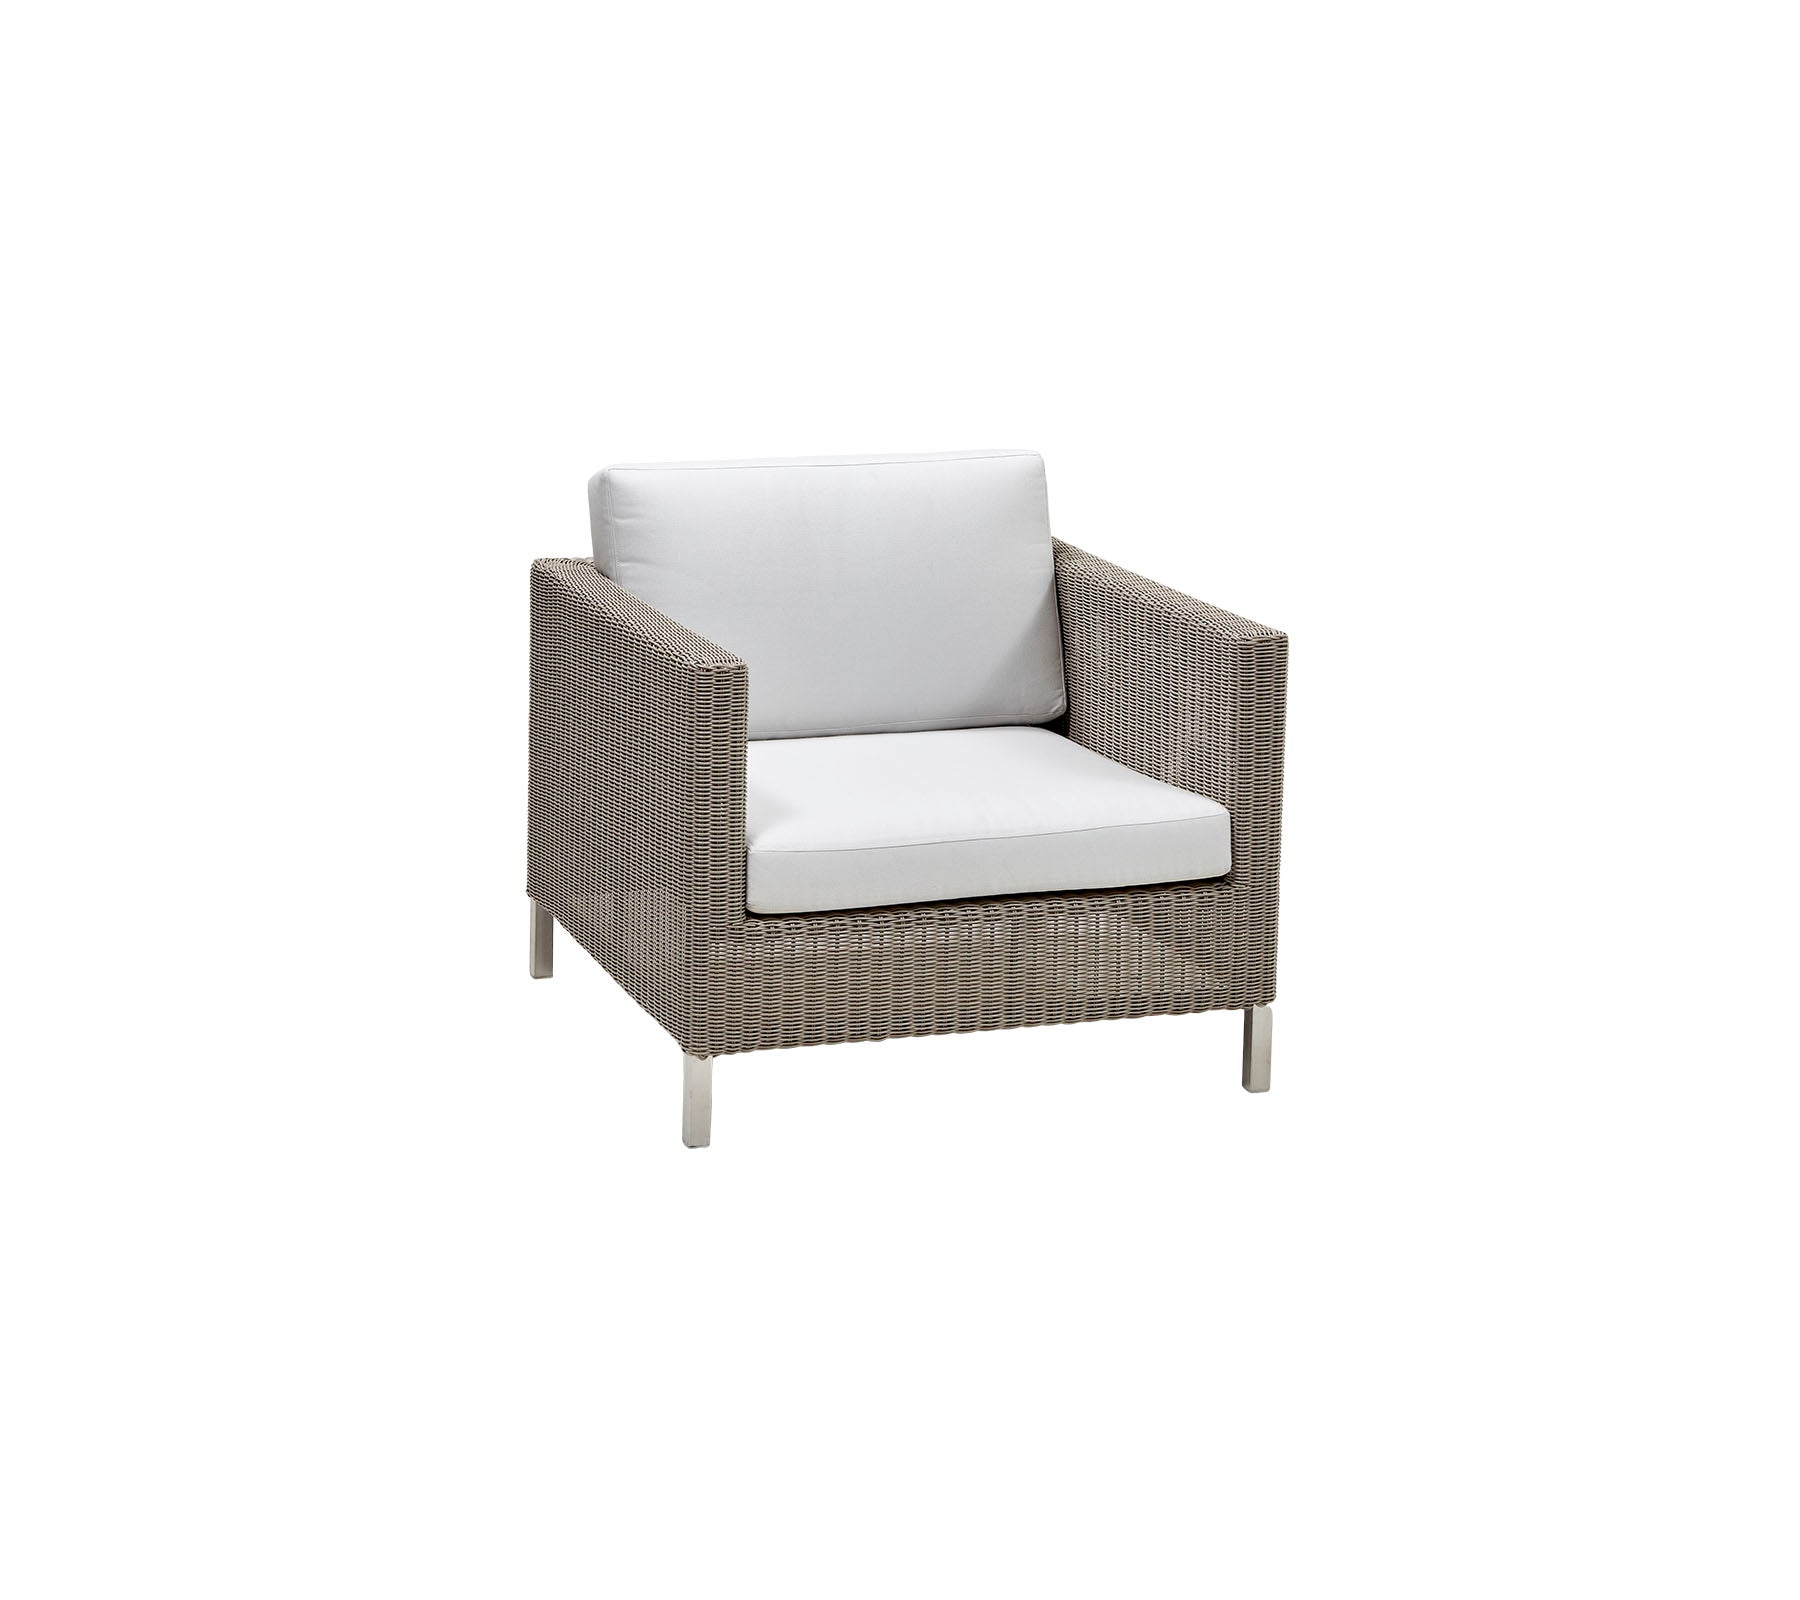 Cane-line Connect Lounge Chair 5498YS97